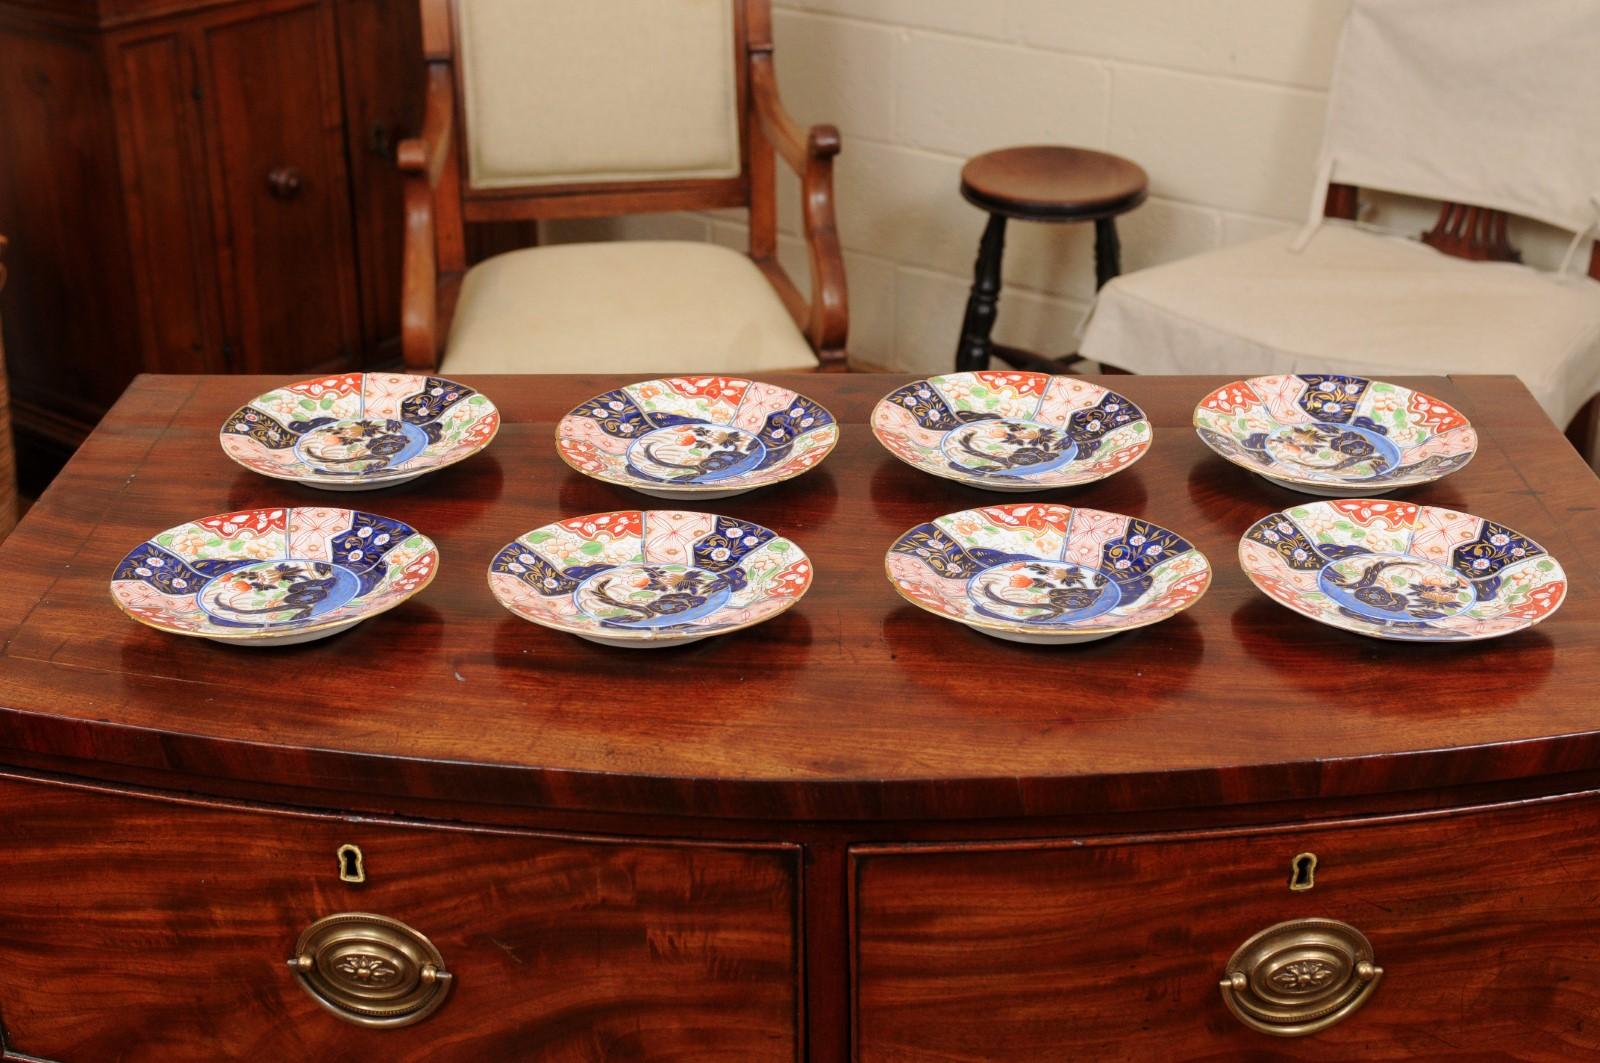 English Set of Eight '8' Porcelain Plates in “Money Tree” Pattern, England, circa 1820 For Sale